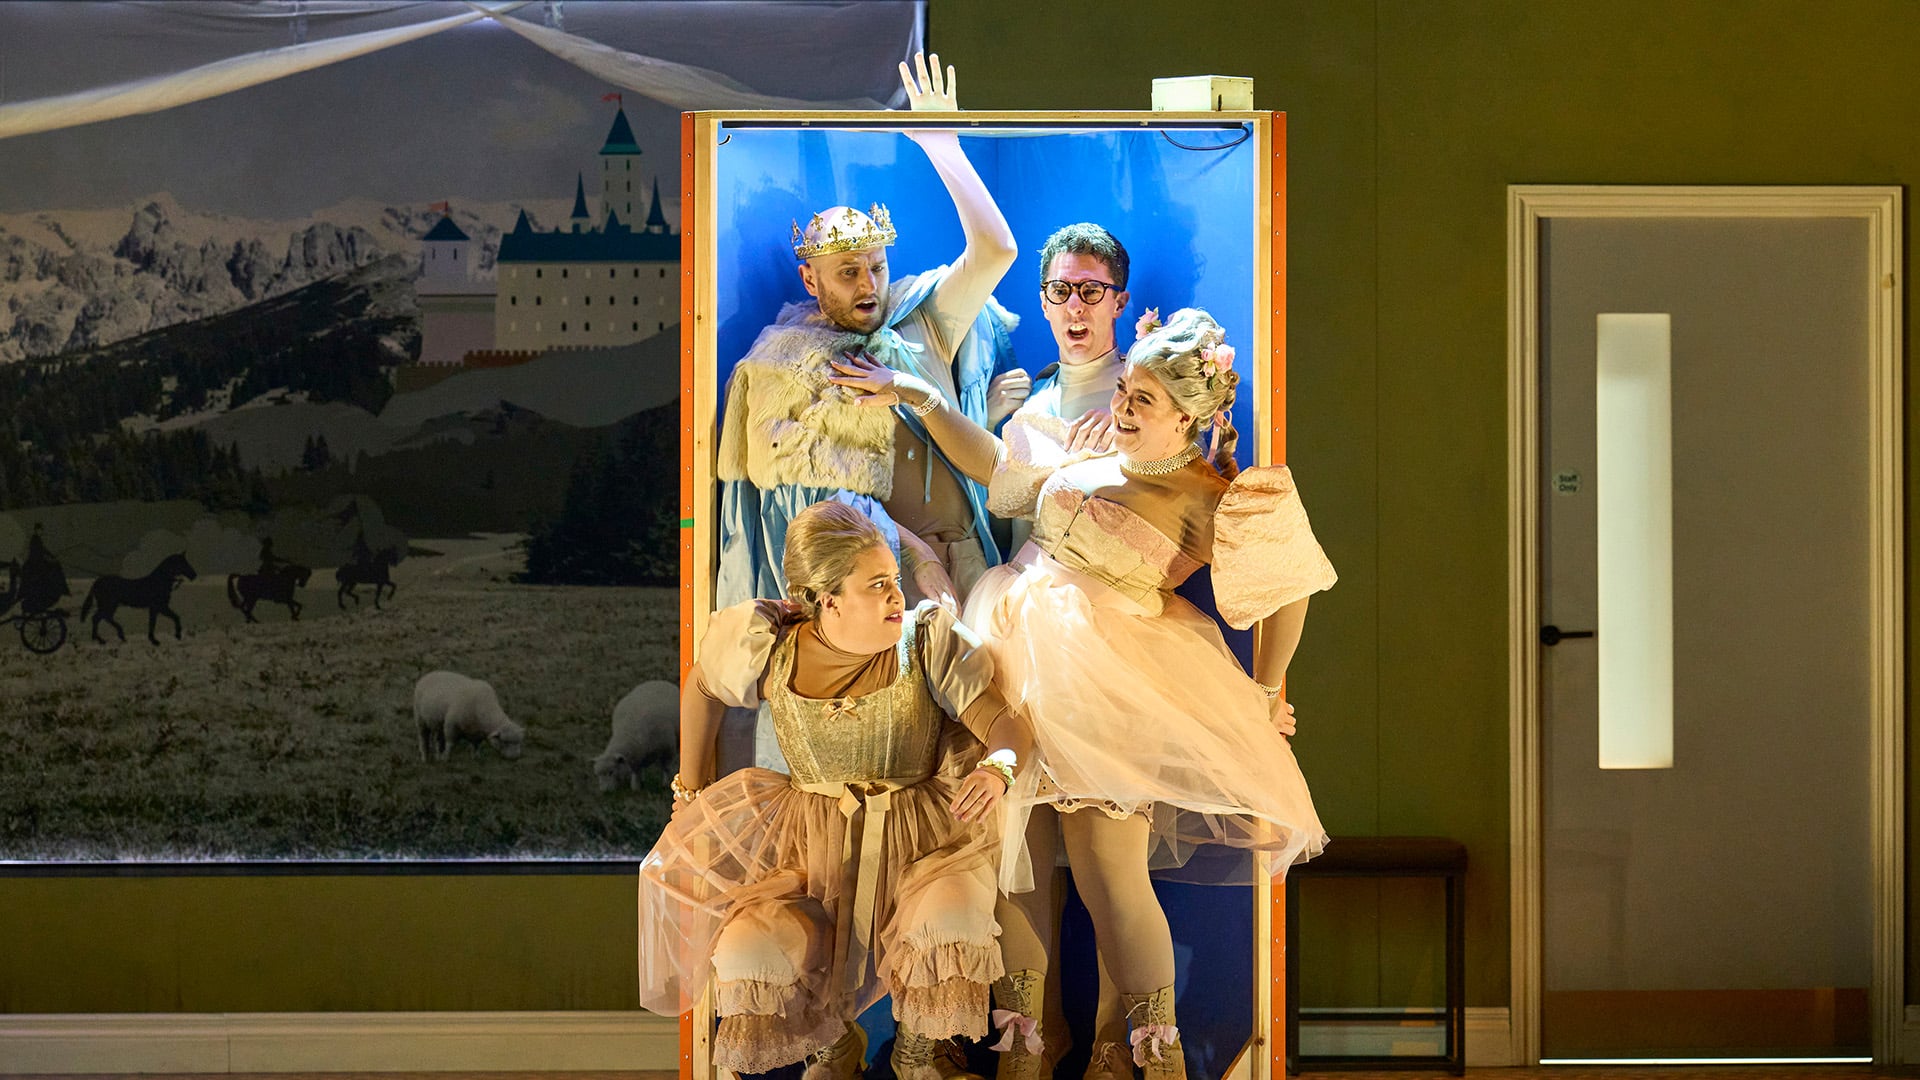 English Touring Opera's Cinderella production photo. A man wearing a golden crown, white fur coat and light-blue fabric looks shocked and raises their arm outside a large wooden box they are stood in. The box has a light blue background. To to right of the man with the crown in the same box, another man wearing a white turtleneck jumper and glasses sneers. Beneath them in the box, two women wearing white frilly Regency dresses laugh and look either side of the box. Behind the group of people in the box, (left) a painting of an alpine country scene with mountains, a castle, and sheep grazing on fields; (right) a lilac door with a sign saying 'Staff Only'.